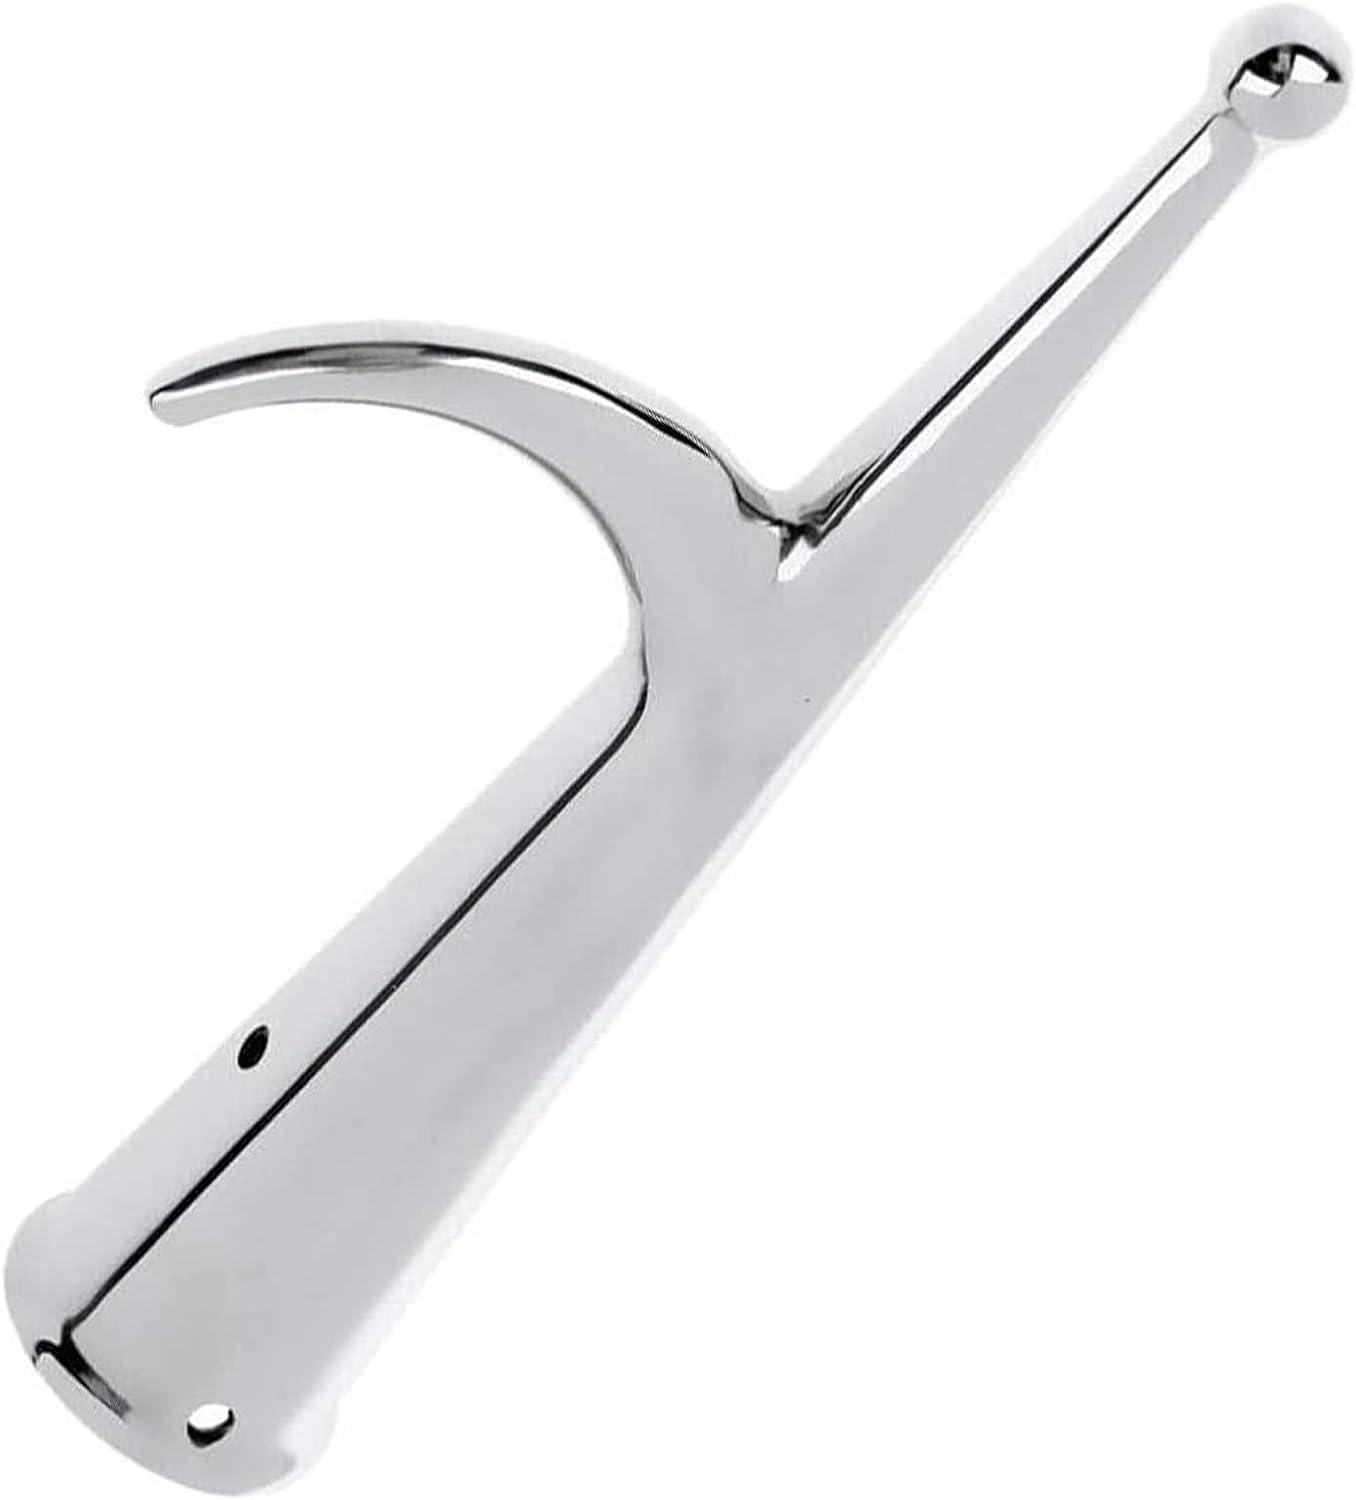 ISURE MARINE Stainless Steel Boat Hook Floating Hook for Extension